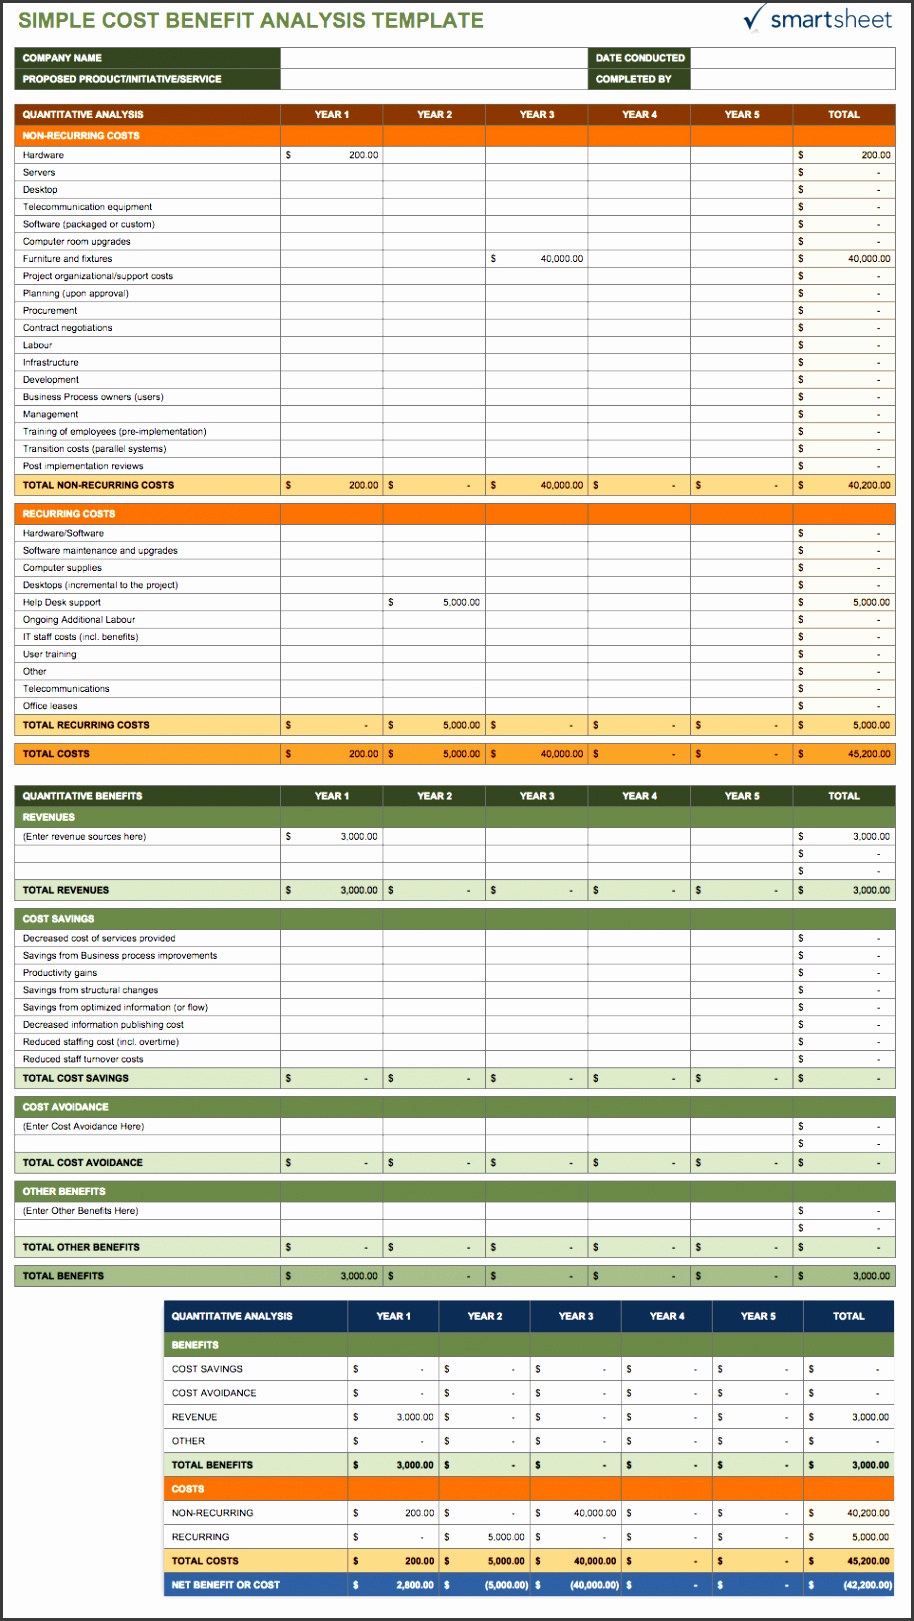 IC SimpleCostBenefitAnalysis This cost benefit analysis template